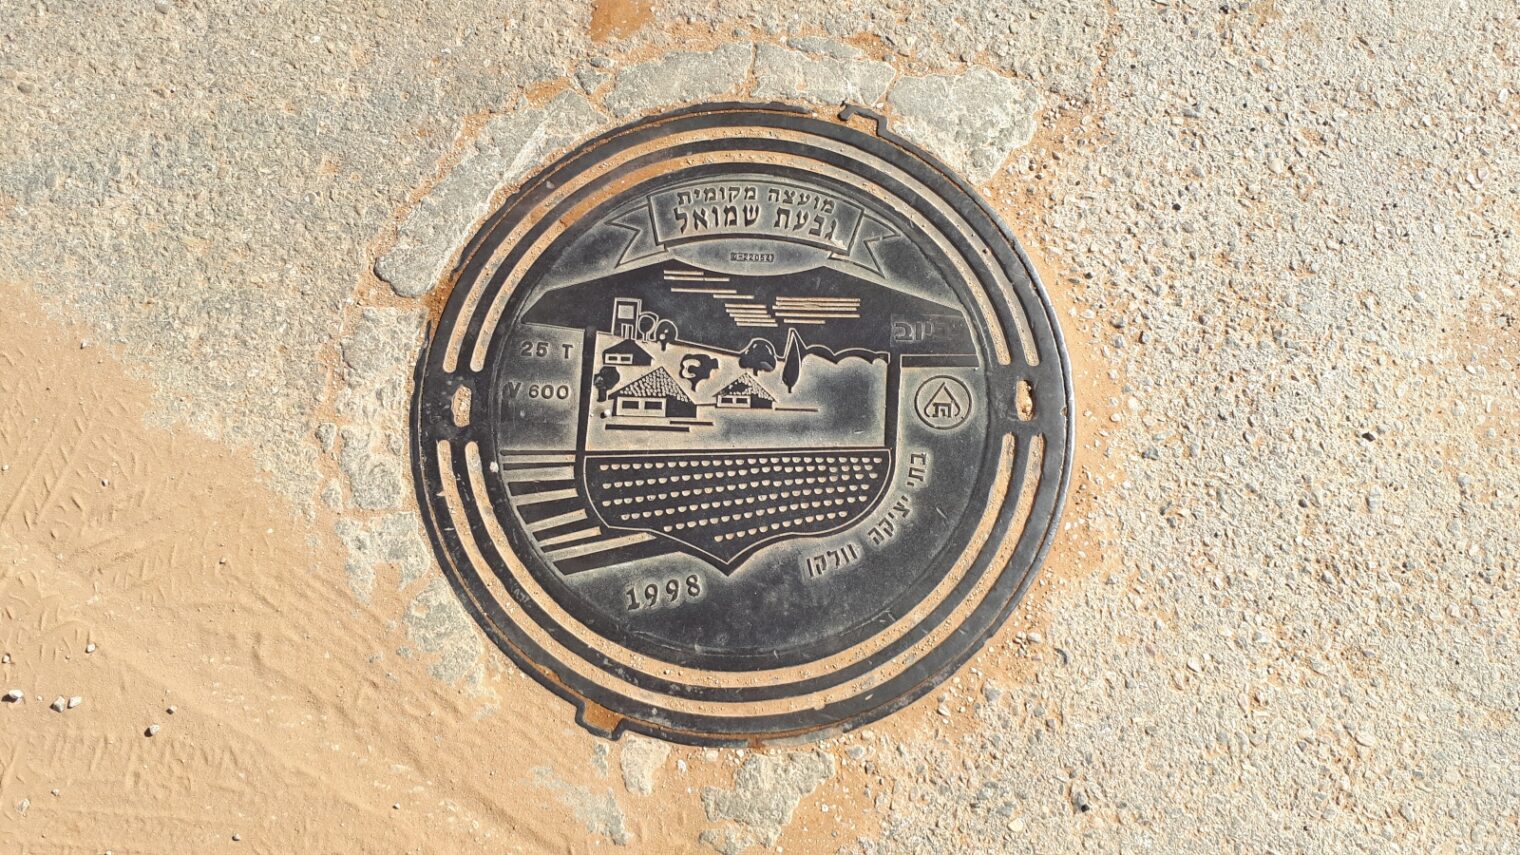 This handsome manhole coverÂ in Givat Shmuel was built in 1998 by Vulcan Foundries. Photo by Eli Zvuluny